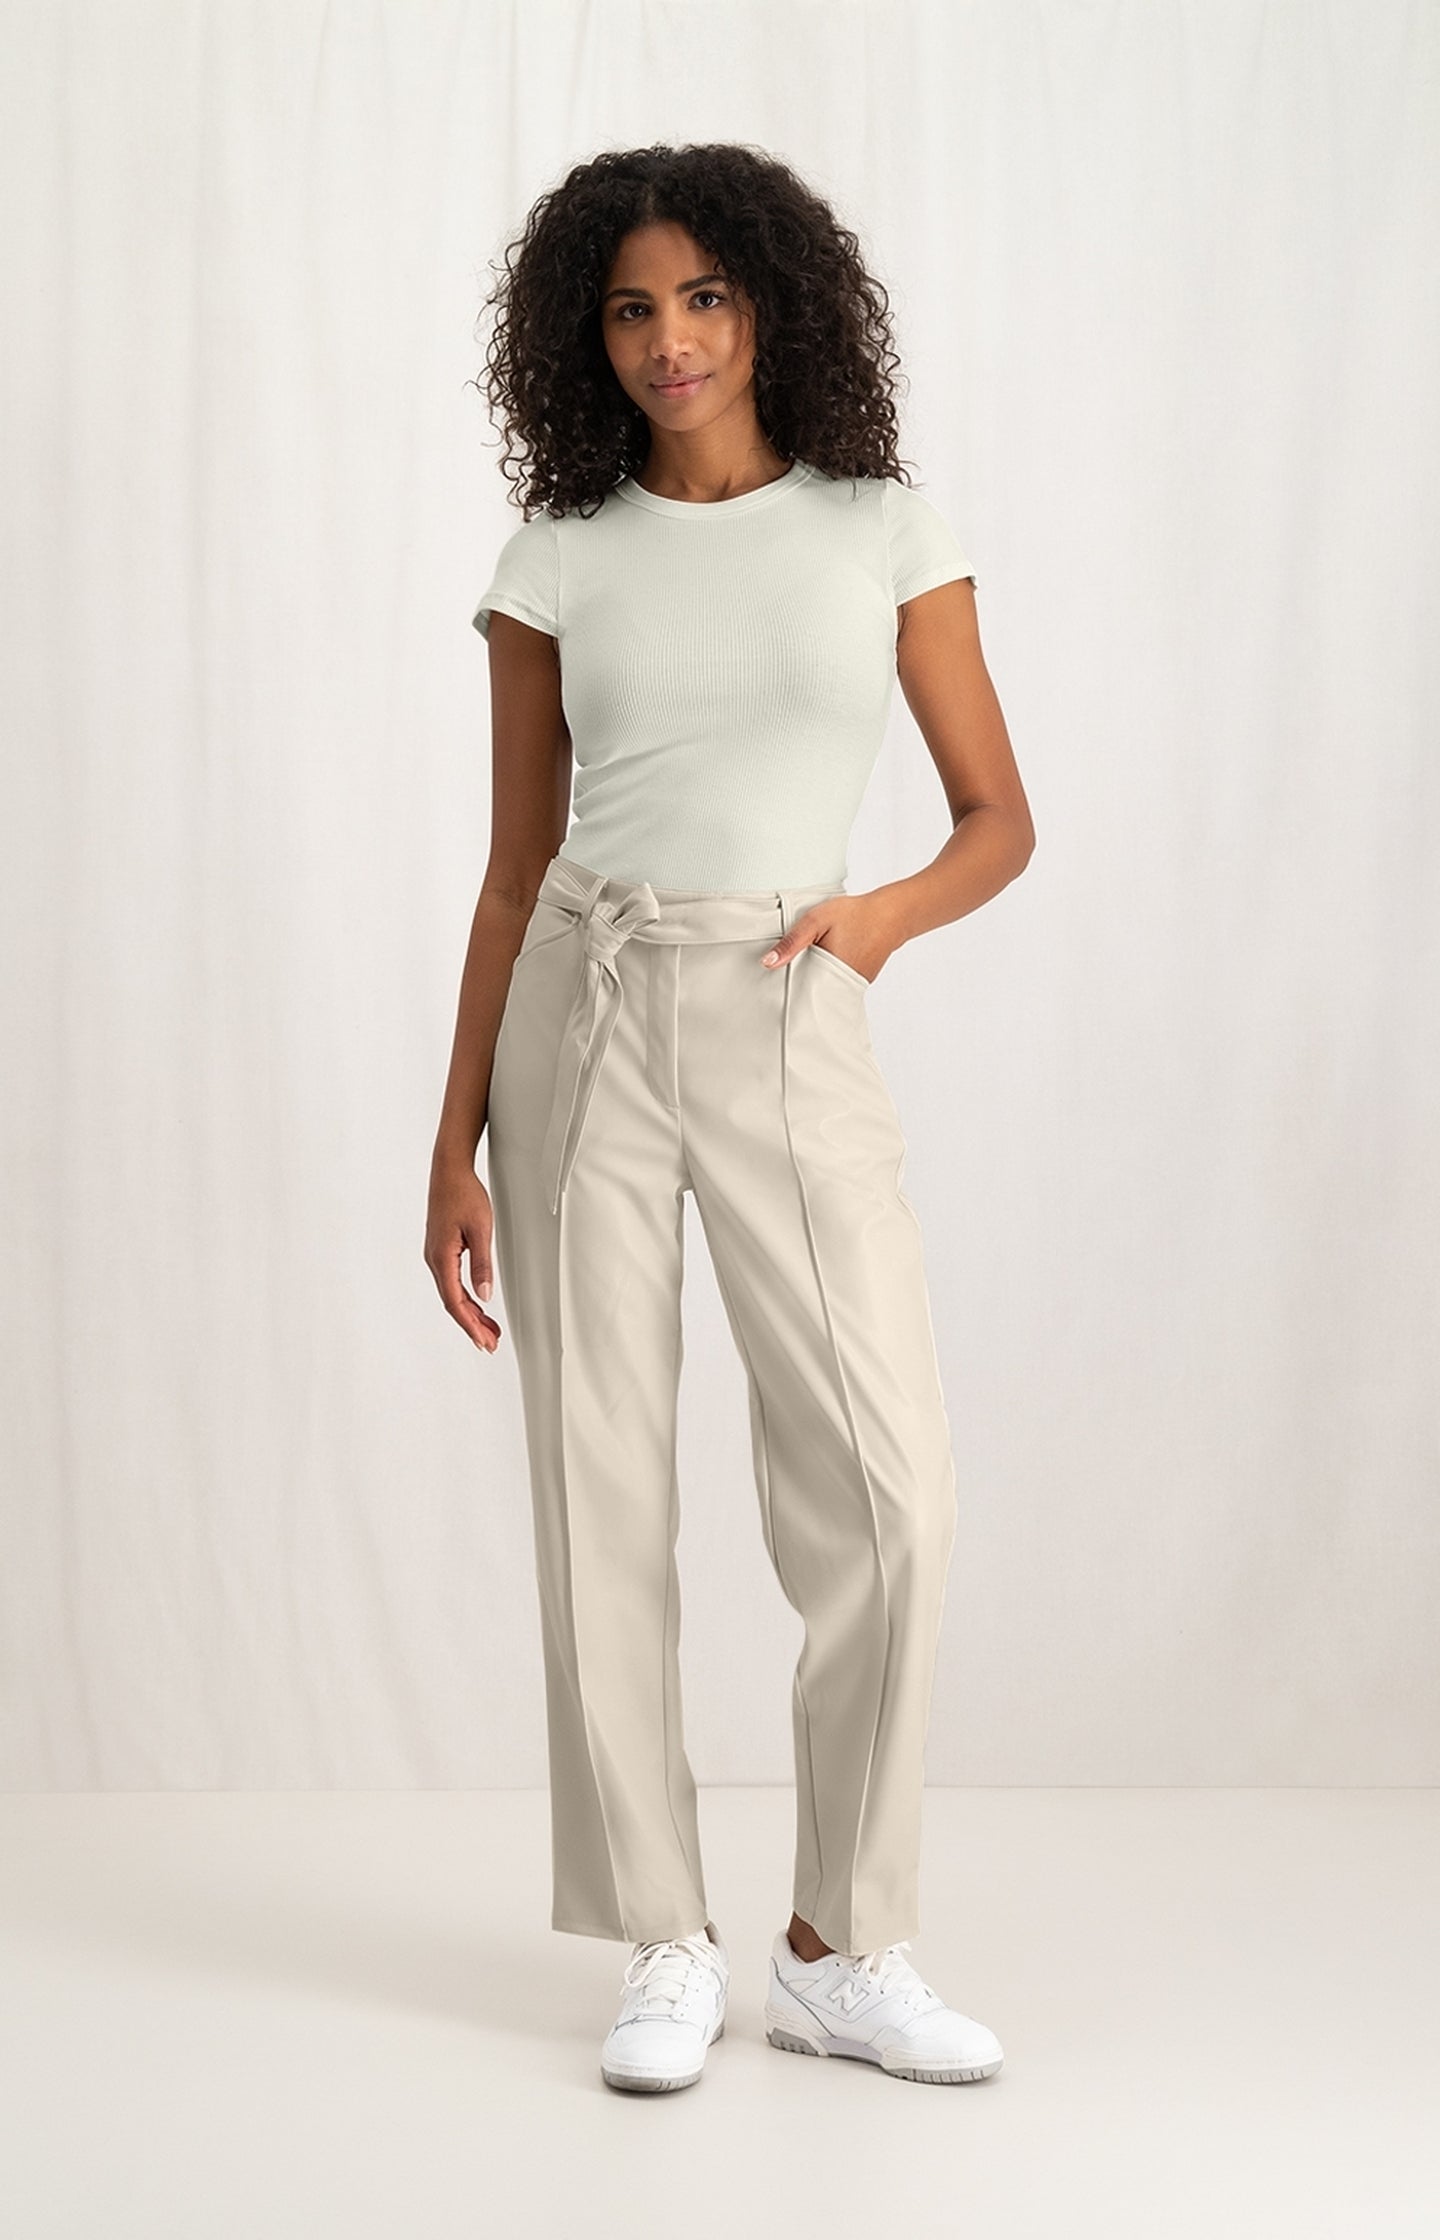 Faux leather trousers with straight leg and pockets